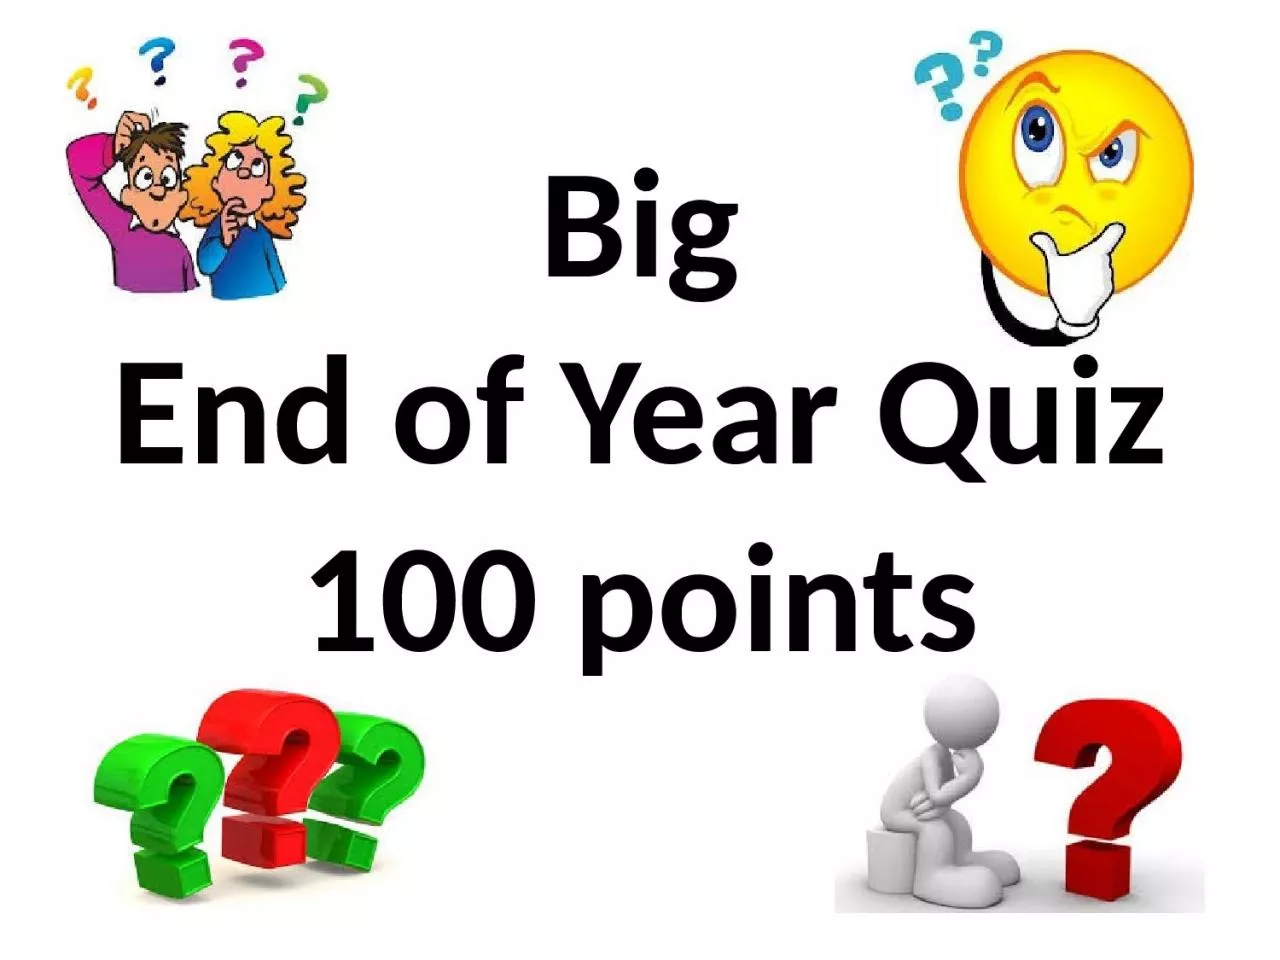 Big End of Year Quiz 100 points